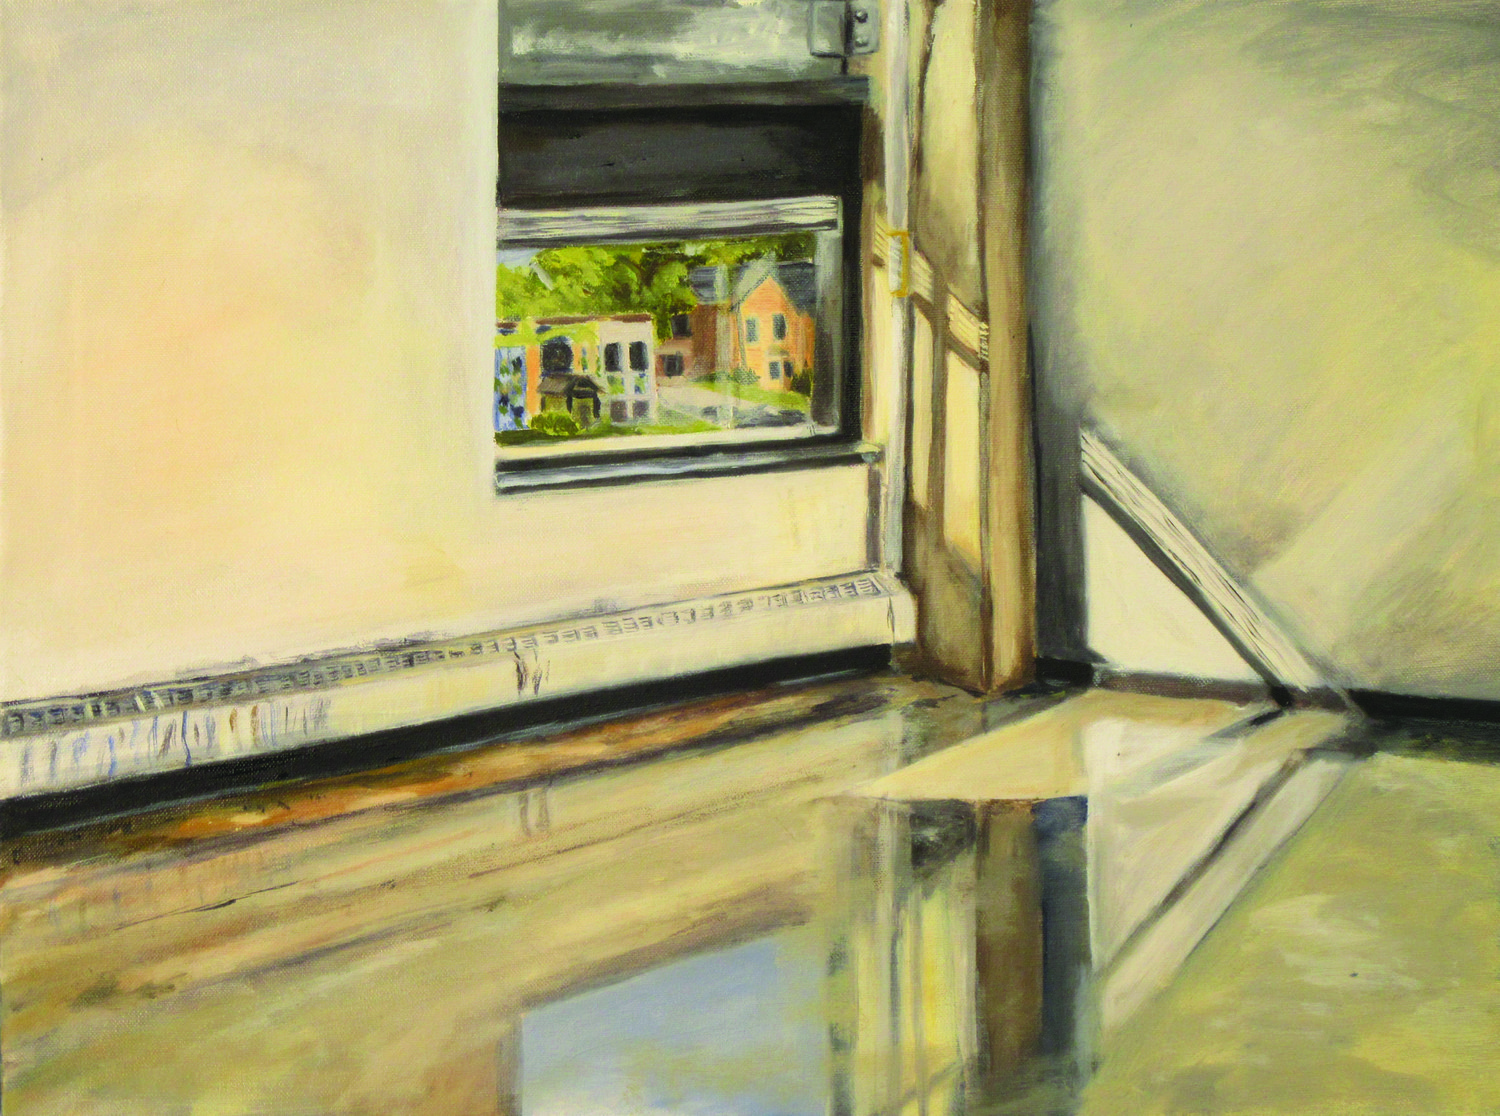 Painting of inside of a room looking out a window onto the street